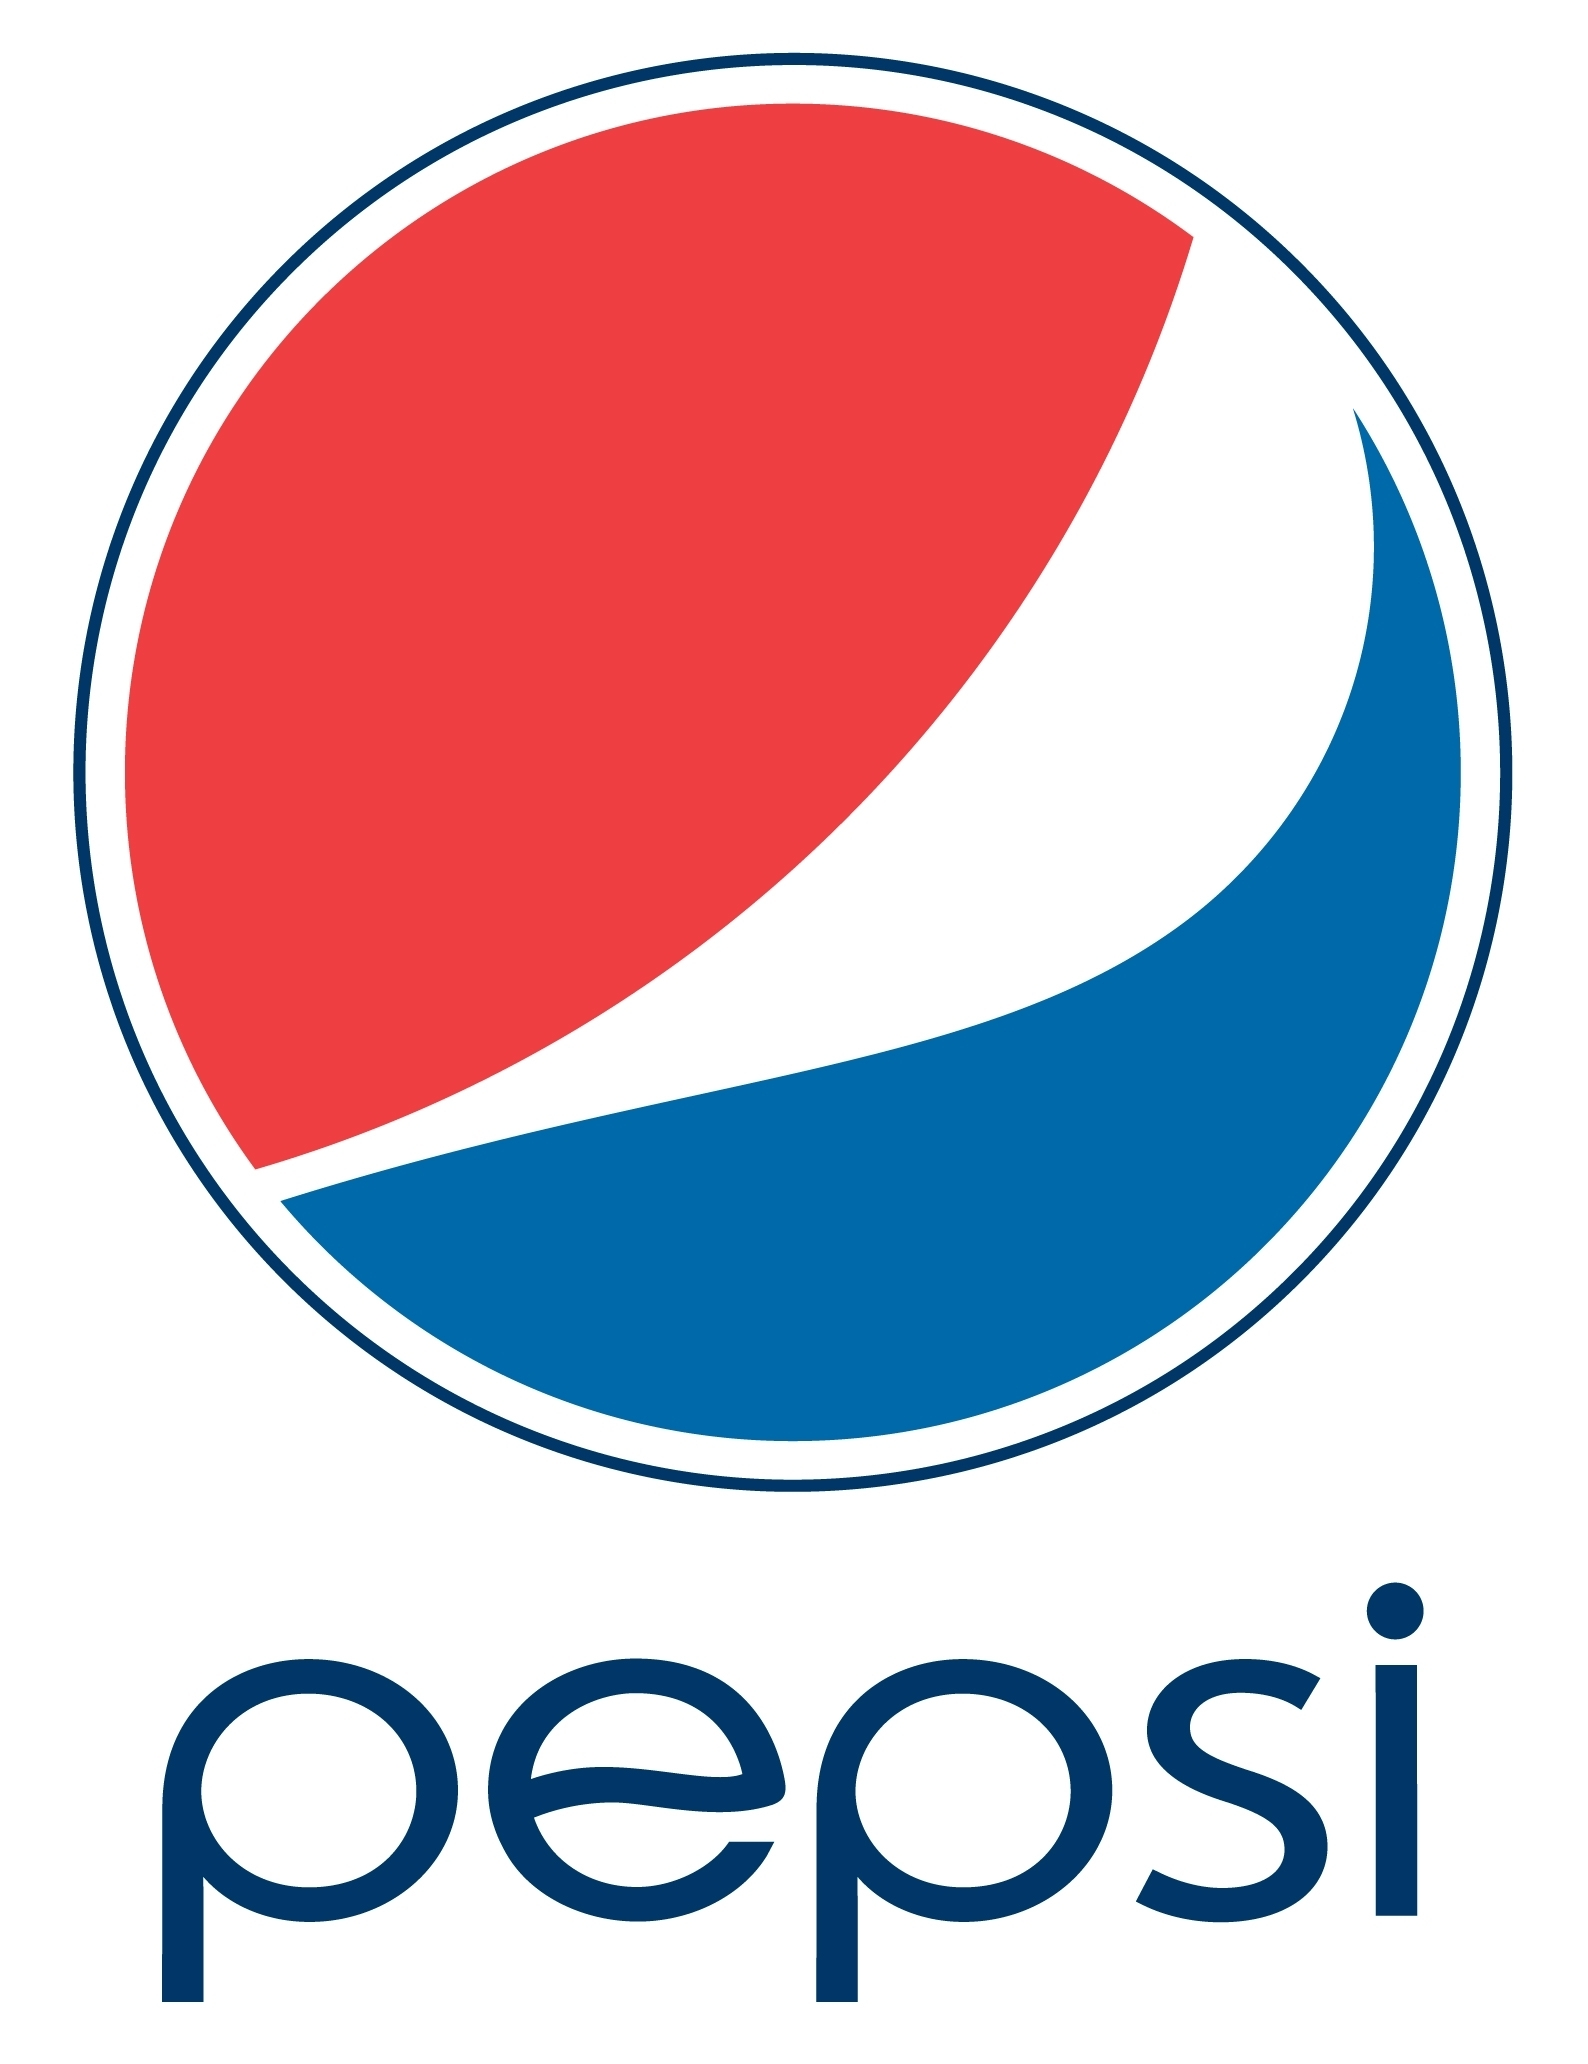 Antique Pepsi Logo - Look in the letter 'e', the old Pepsi logo is - #90512683 added by ...